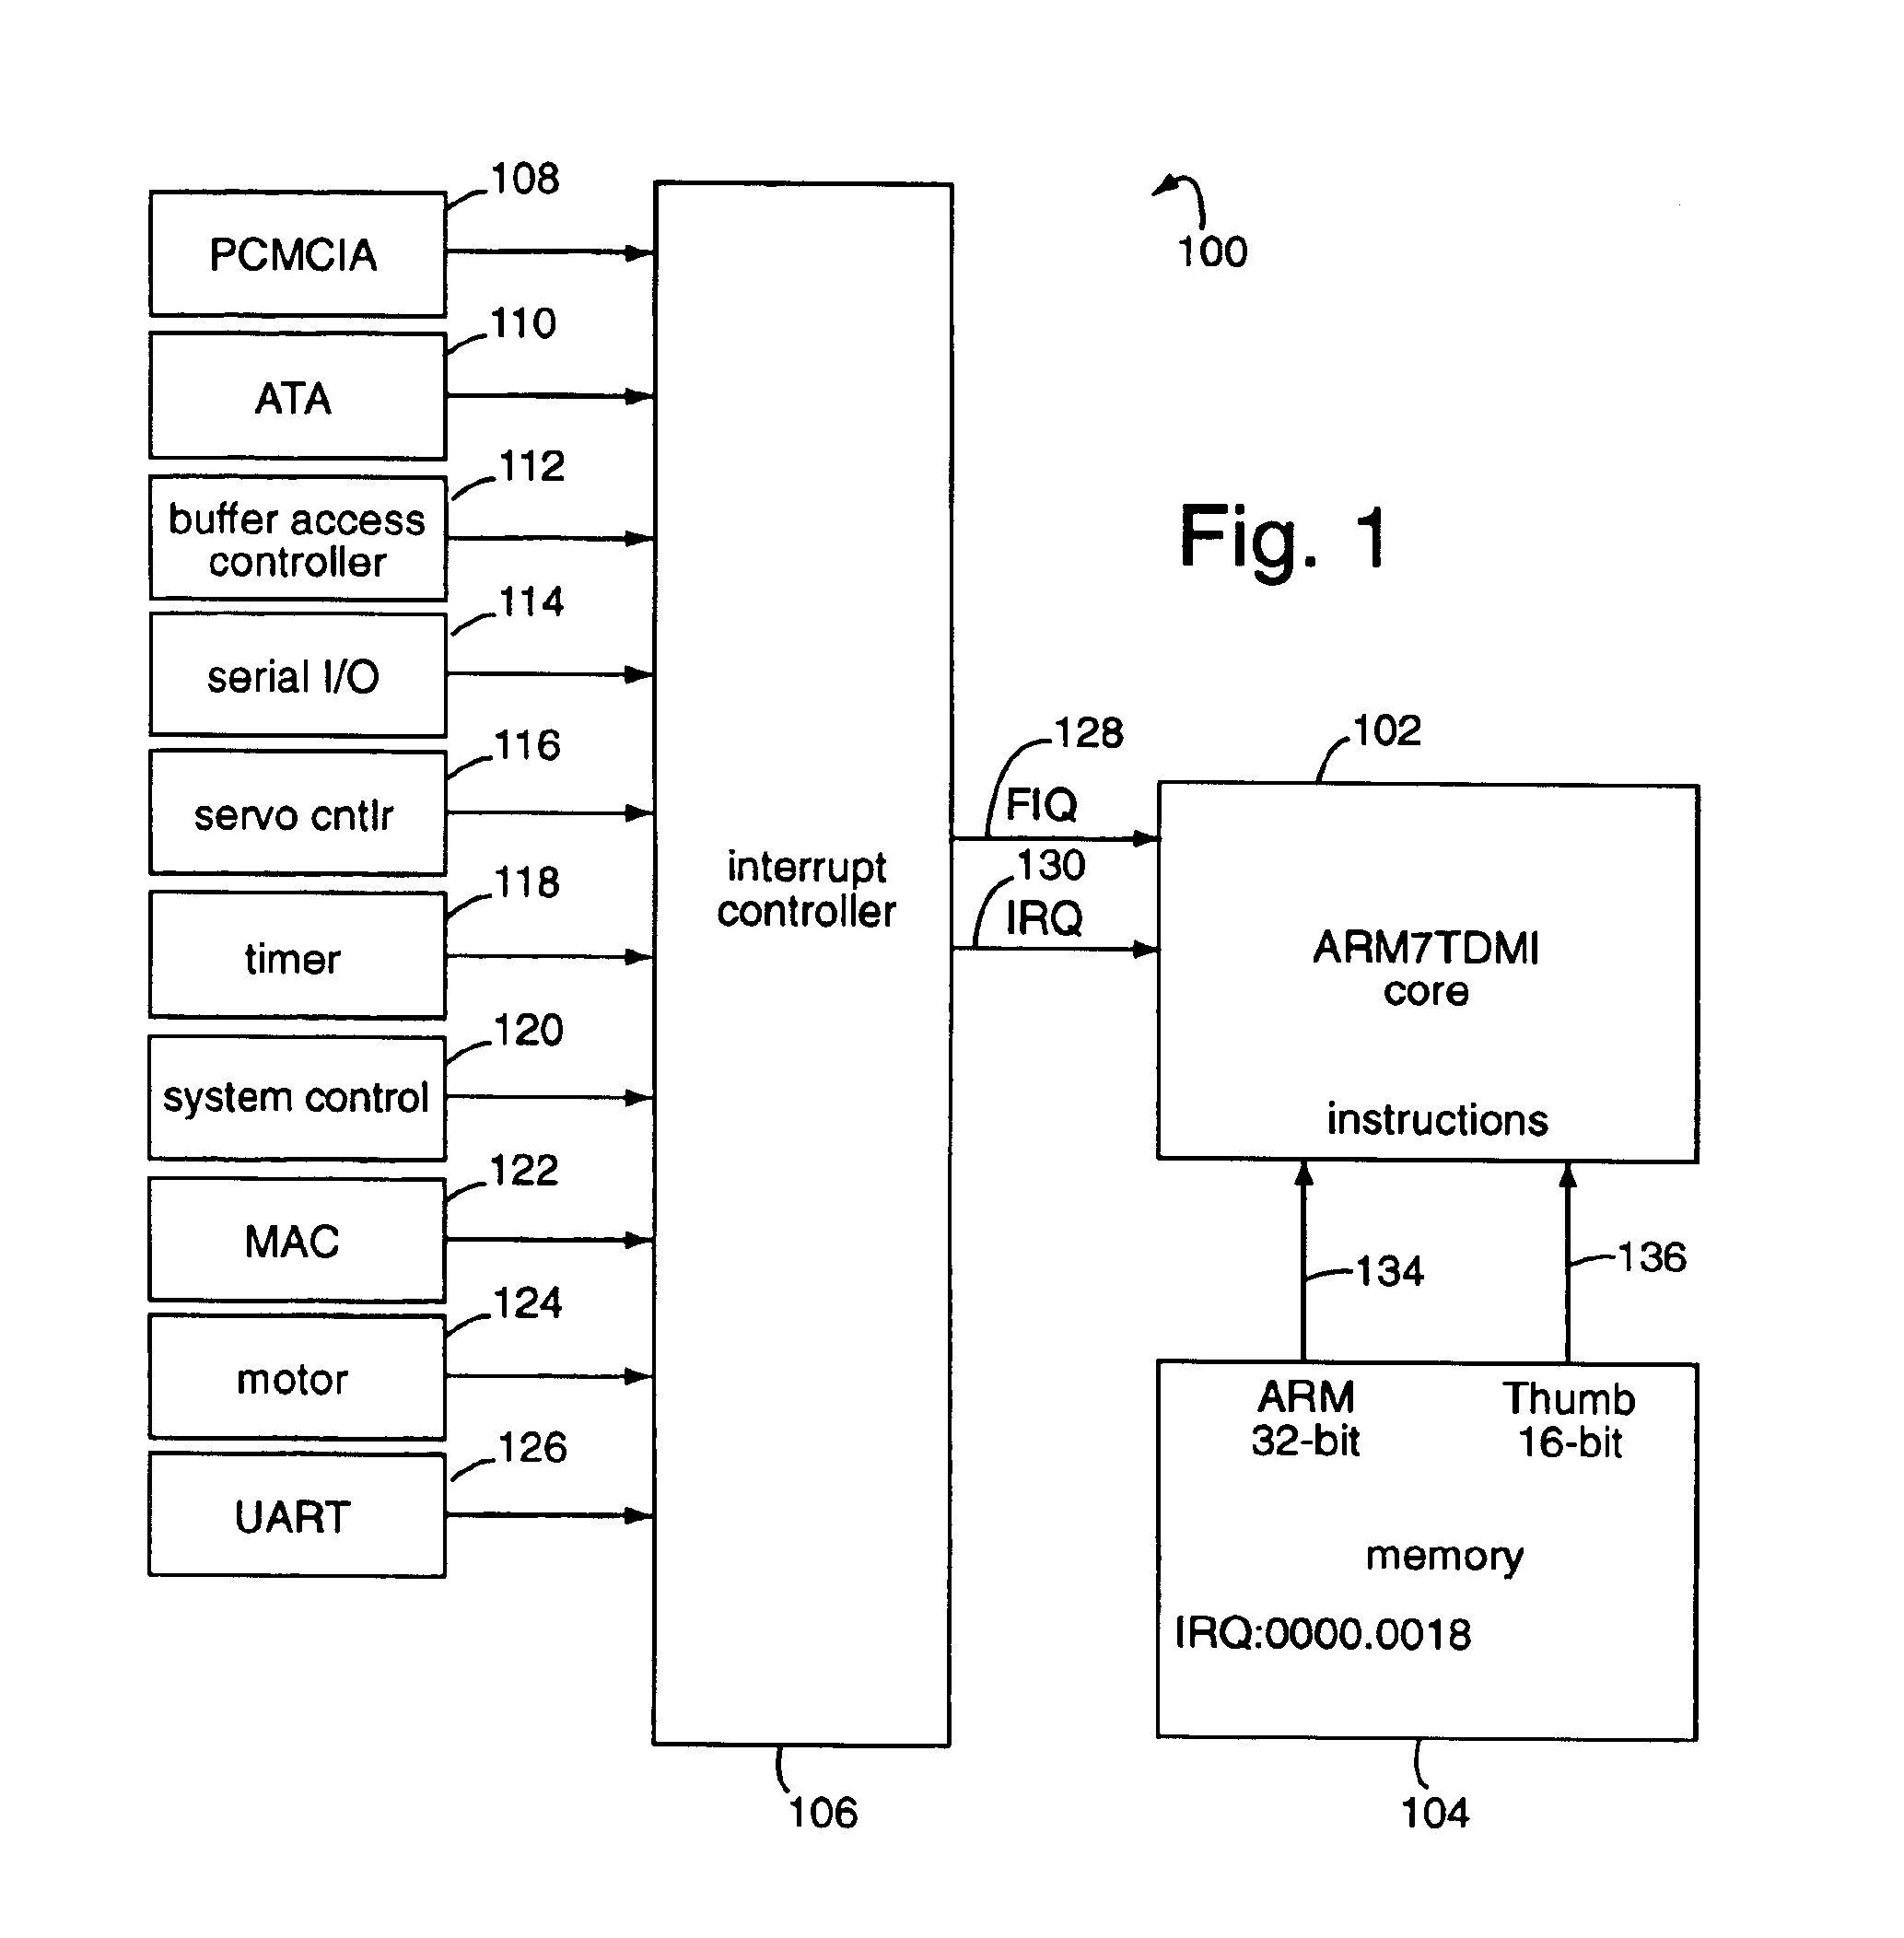 Integrated circuit including interrupt controller with shared preamble execution and global-disable control bit